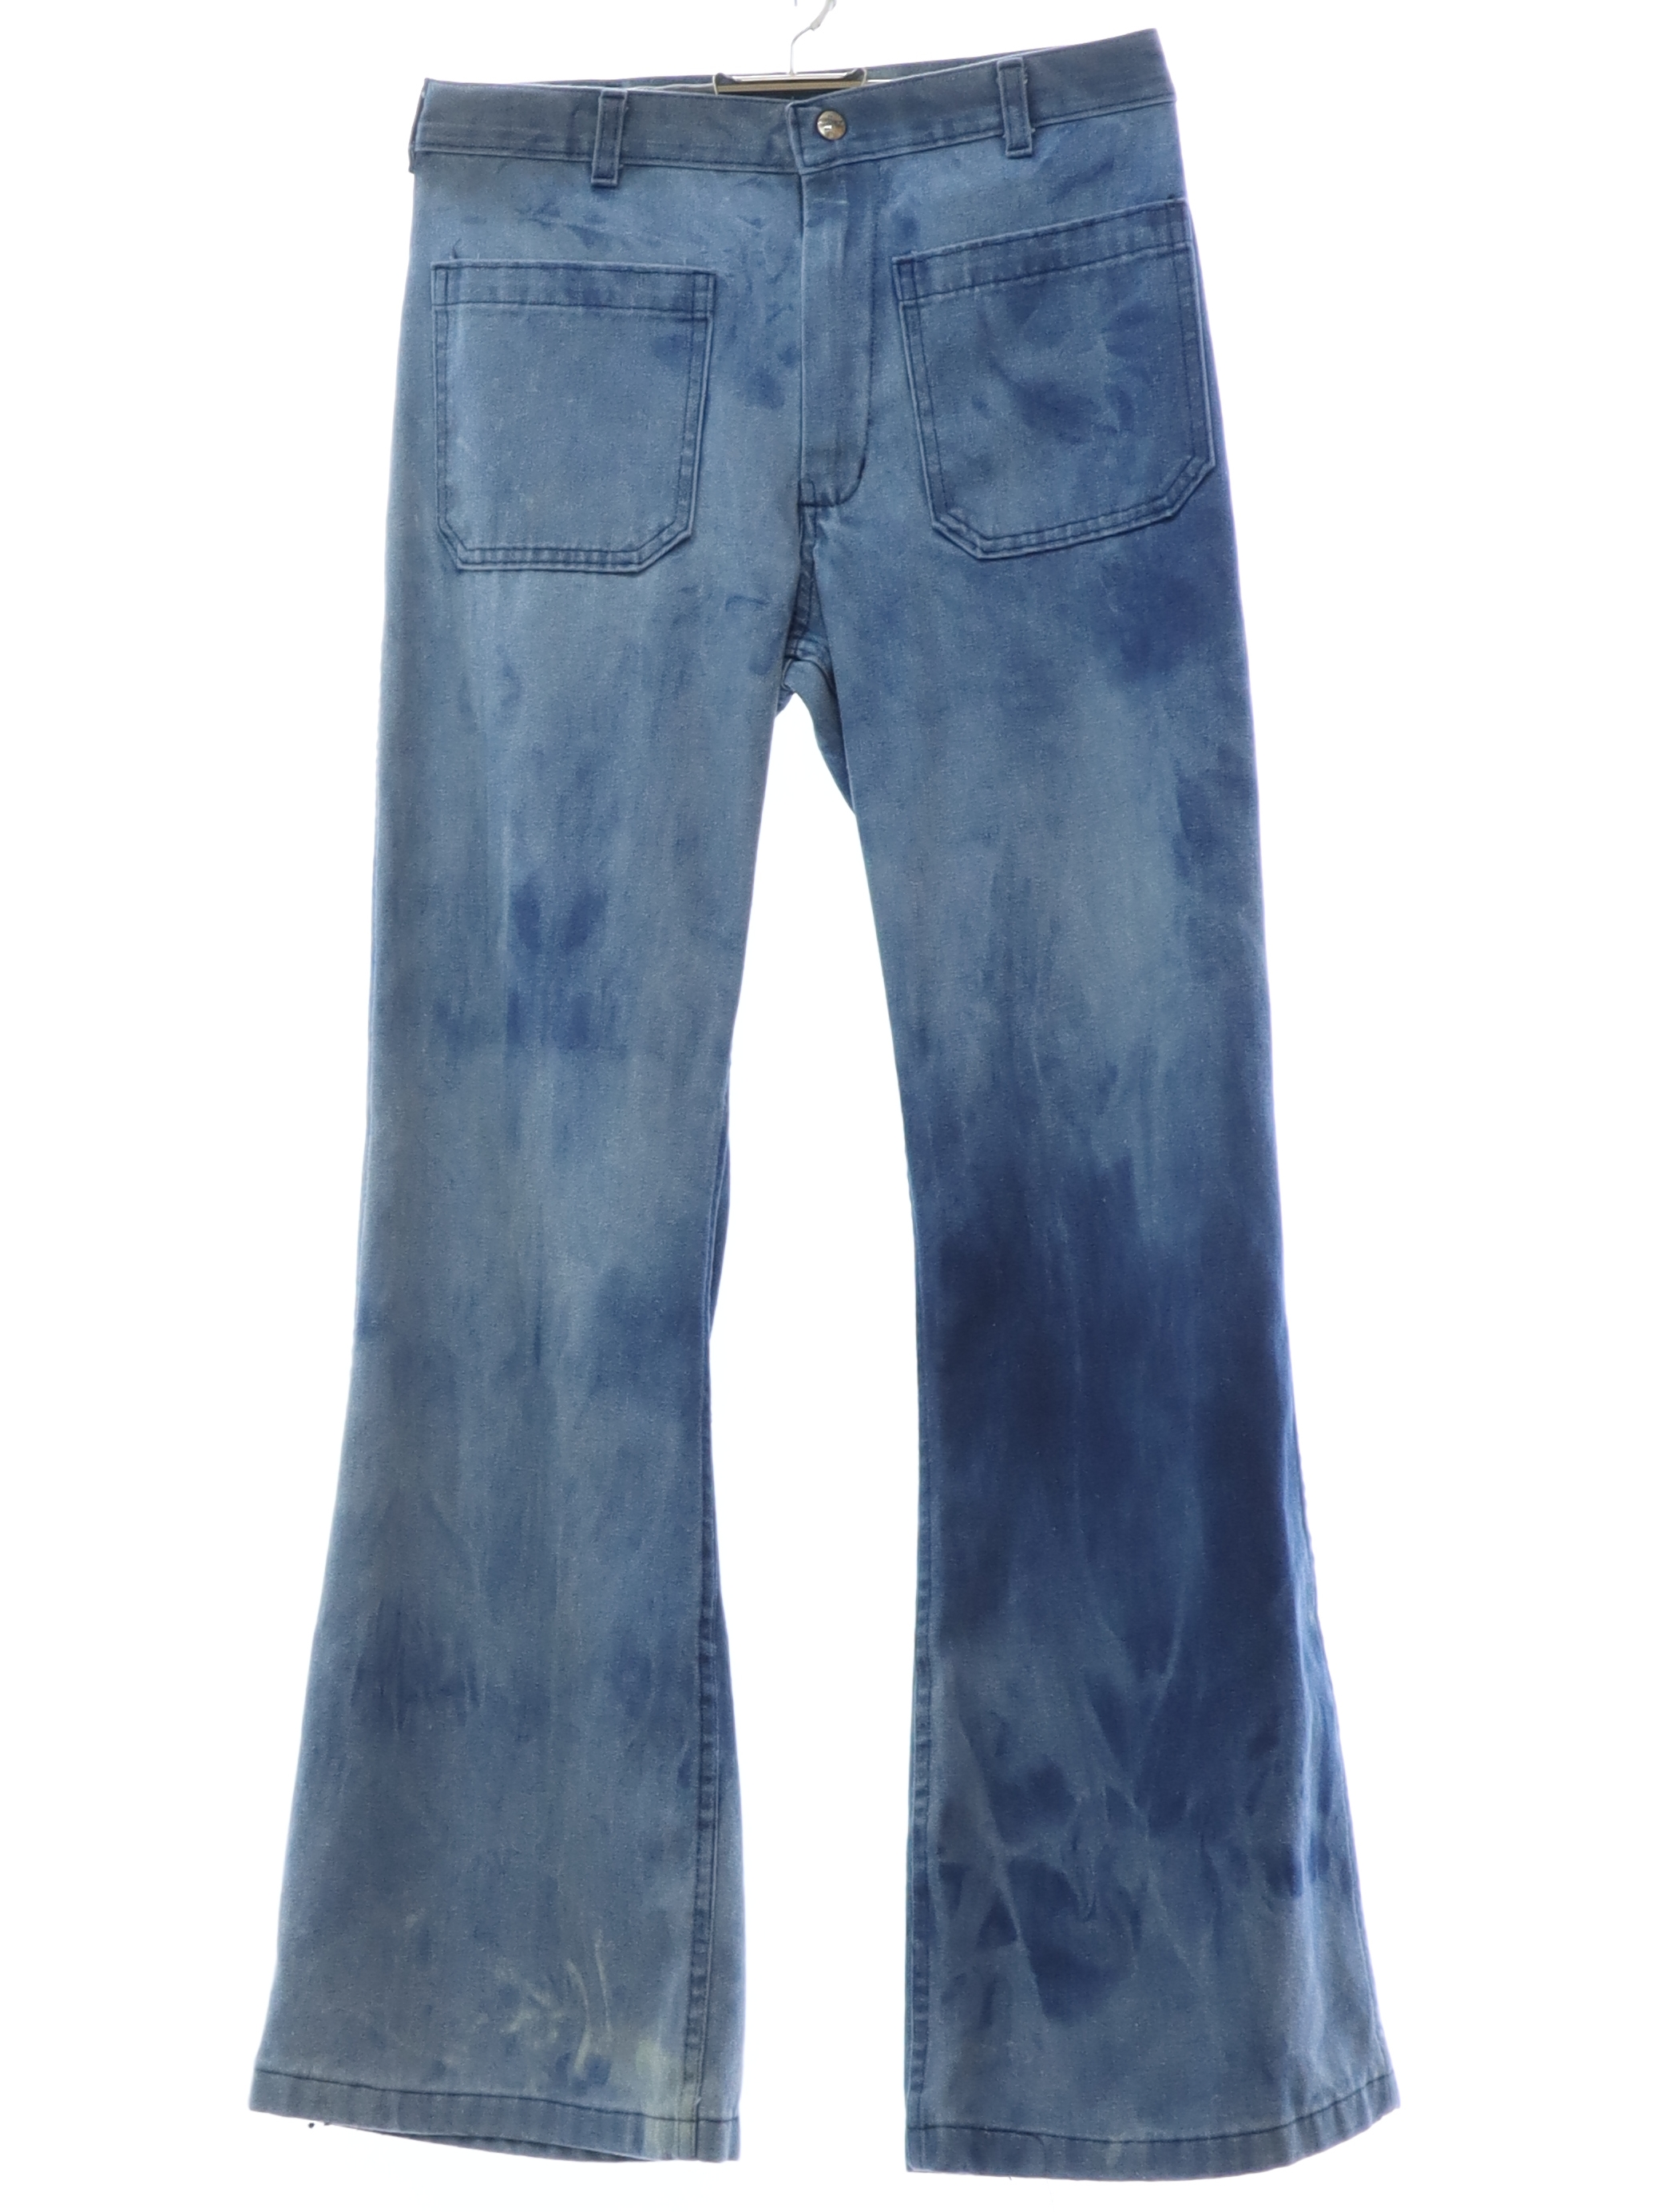 70's Seafarer Bellbottom Pants: 70s style (made in 90s) -Seafarer- Unisex  heavy marbelized faded (tie dye like effect) blue cotton polyester belnd  denim naval style bellbottom jeans pants with cuffless hem, two